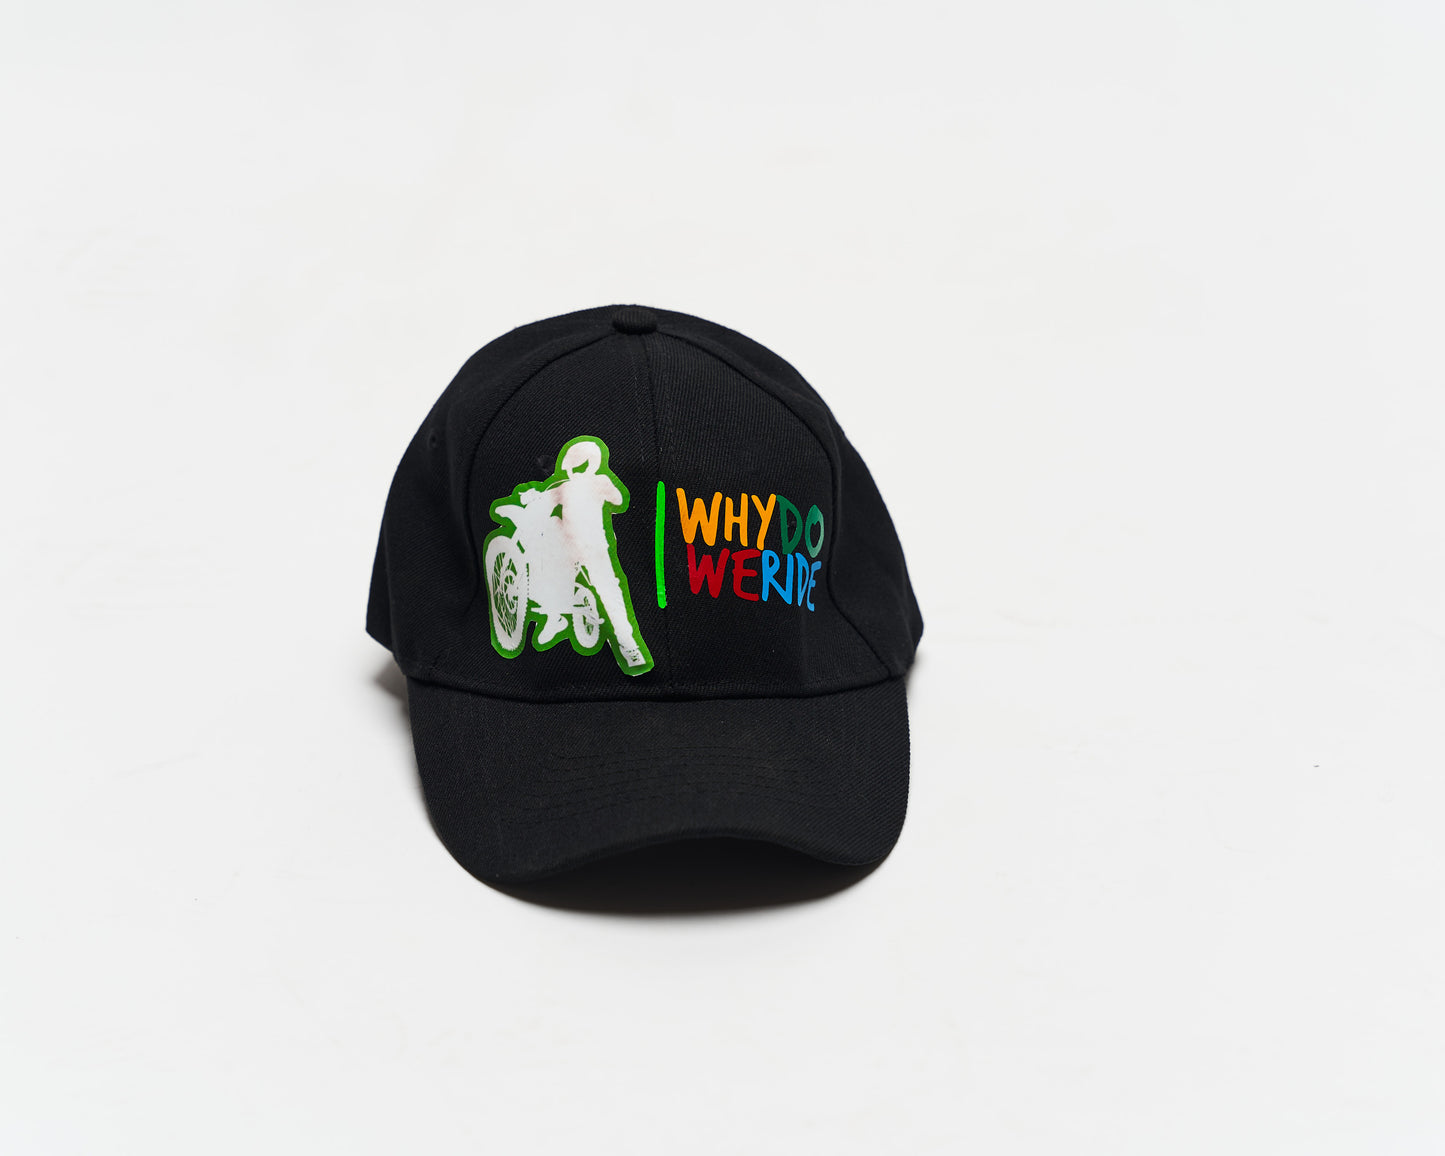 B-360 "Why We Ride" Hat